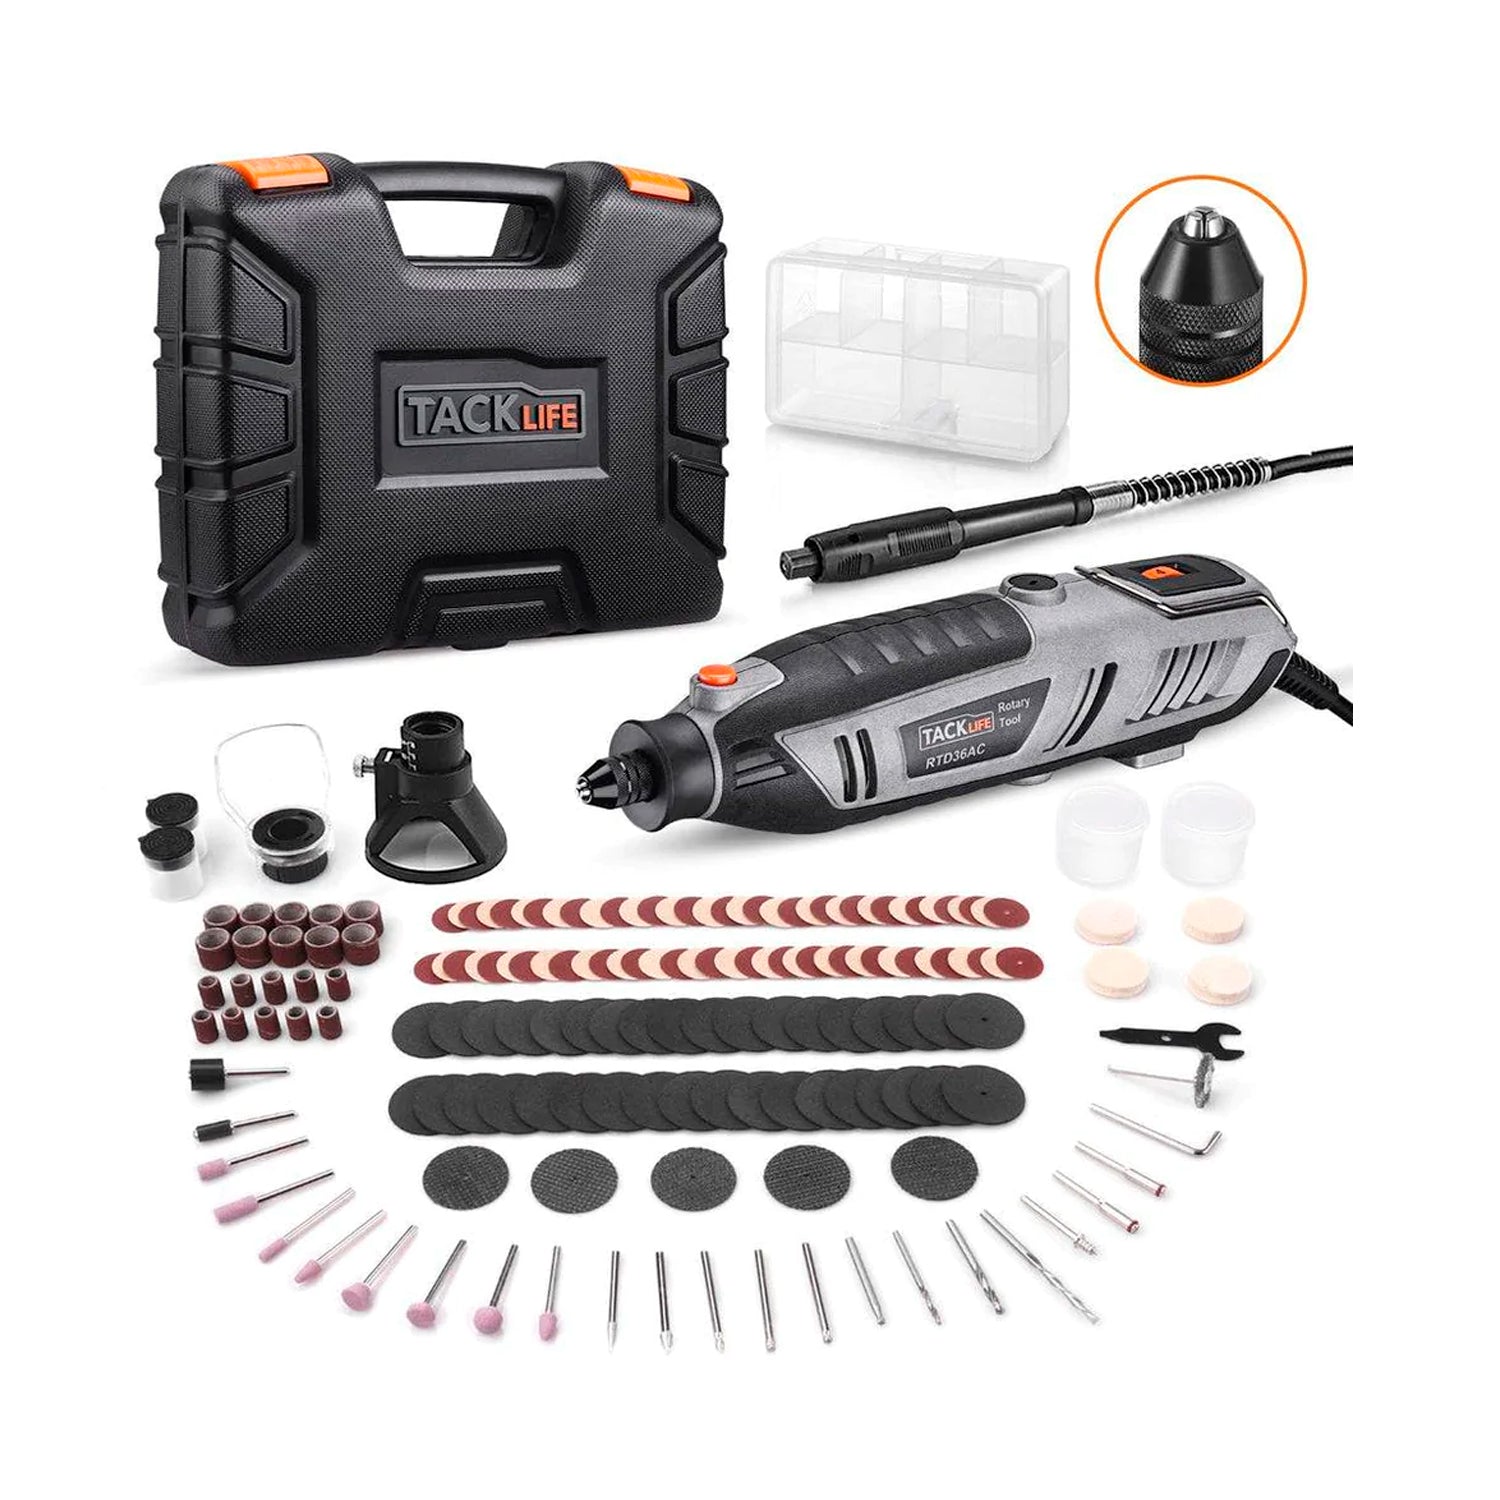 Rotary Tool 200W Power Variable Speed With 170 Accessories